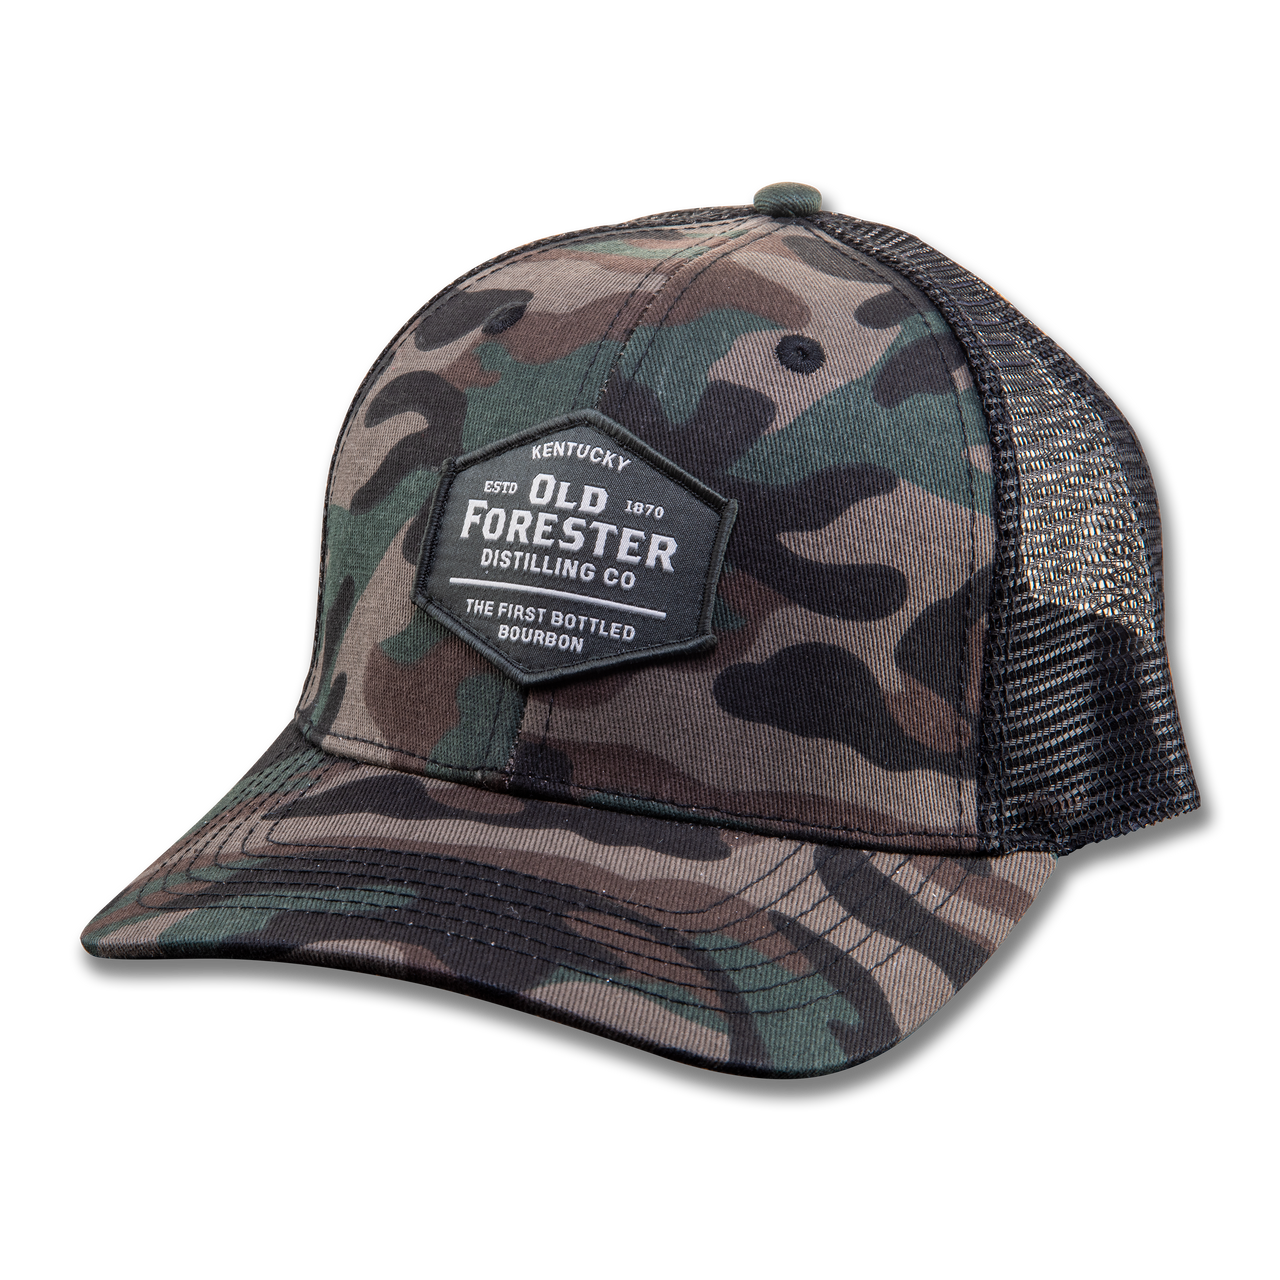 Old Forester Camouflage Trucker Hat